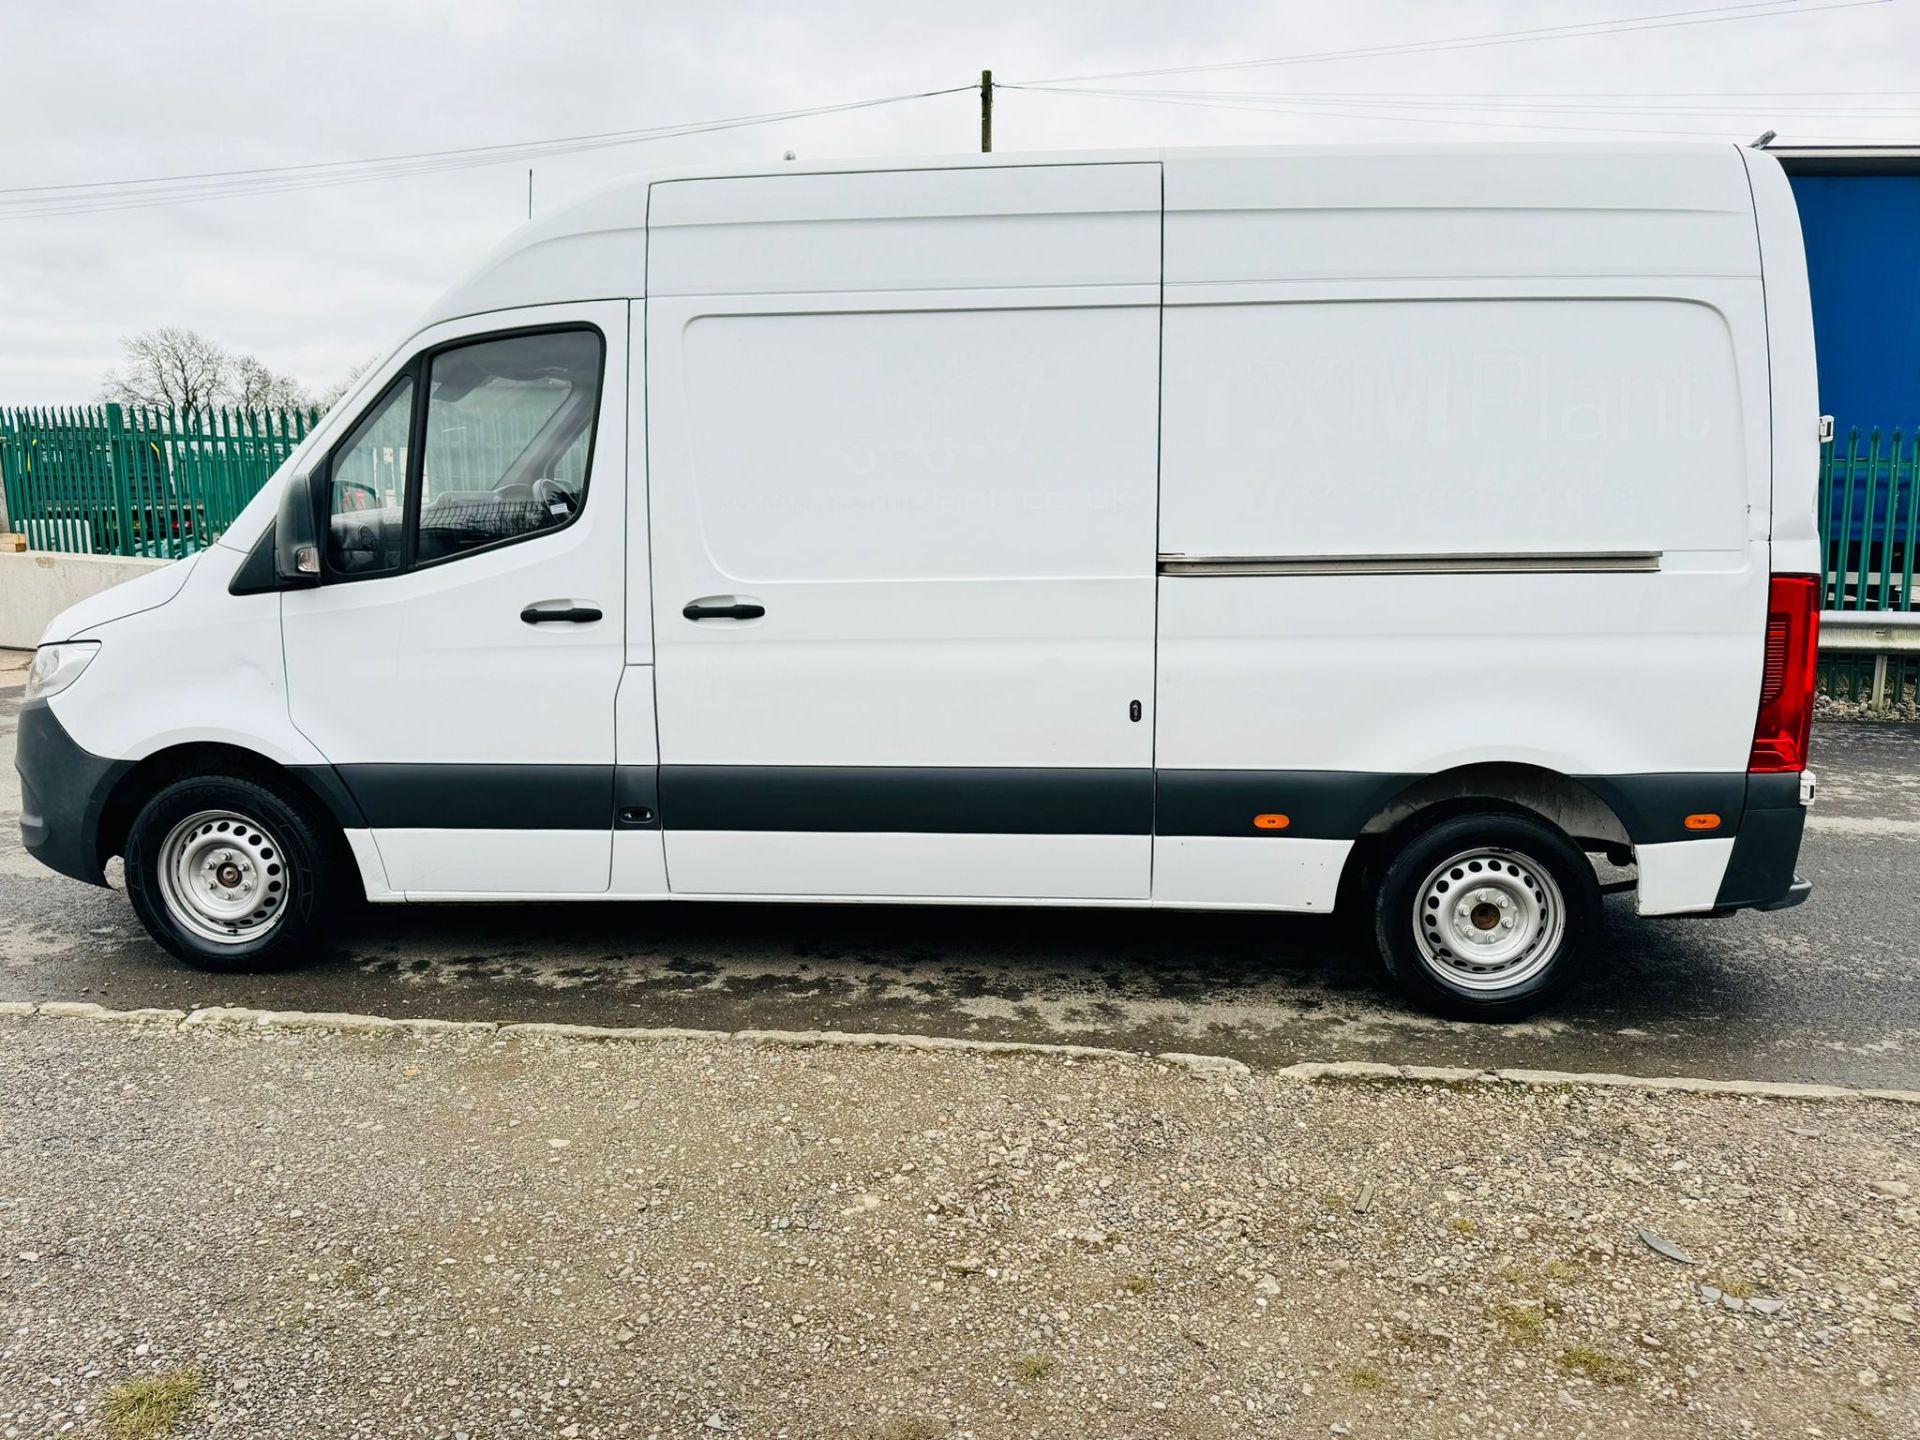 MERCEDES SPRINTER 314CDI MWB HI ROOF - 2019 19 Reg - 1 Owner From New - Euro 6 - NEW SHAPE!! - Image 2 of 8